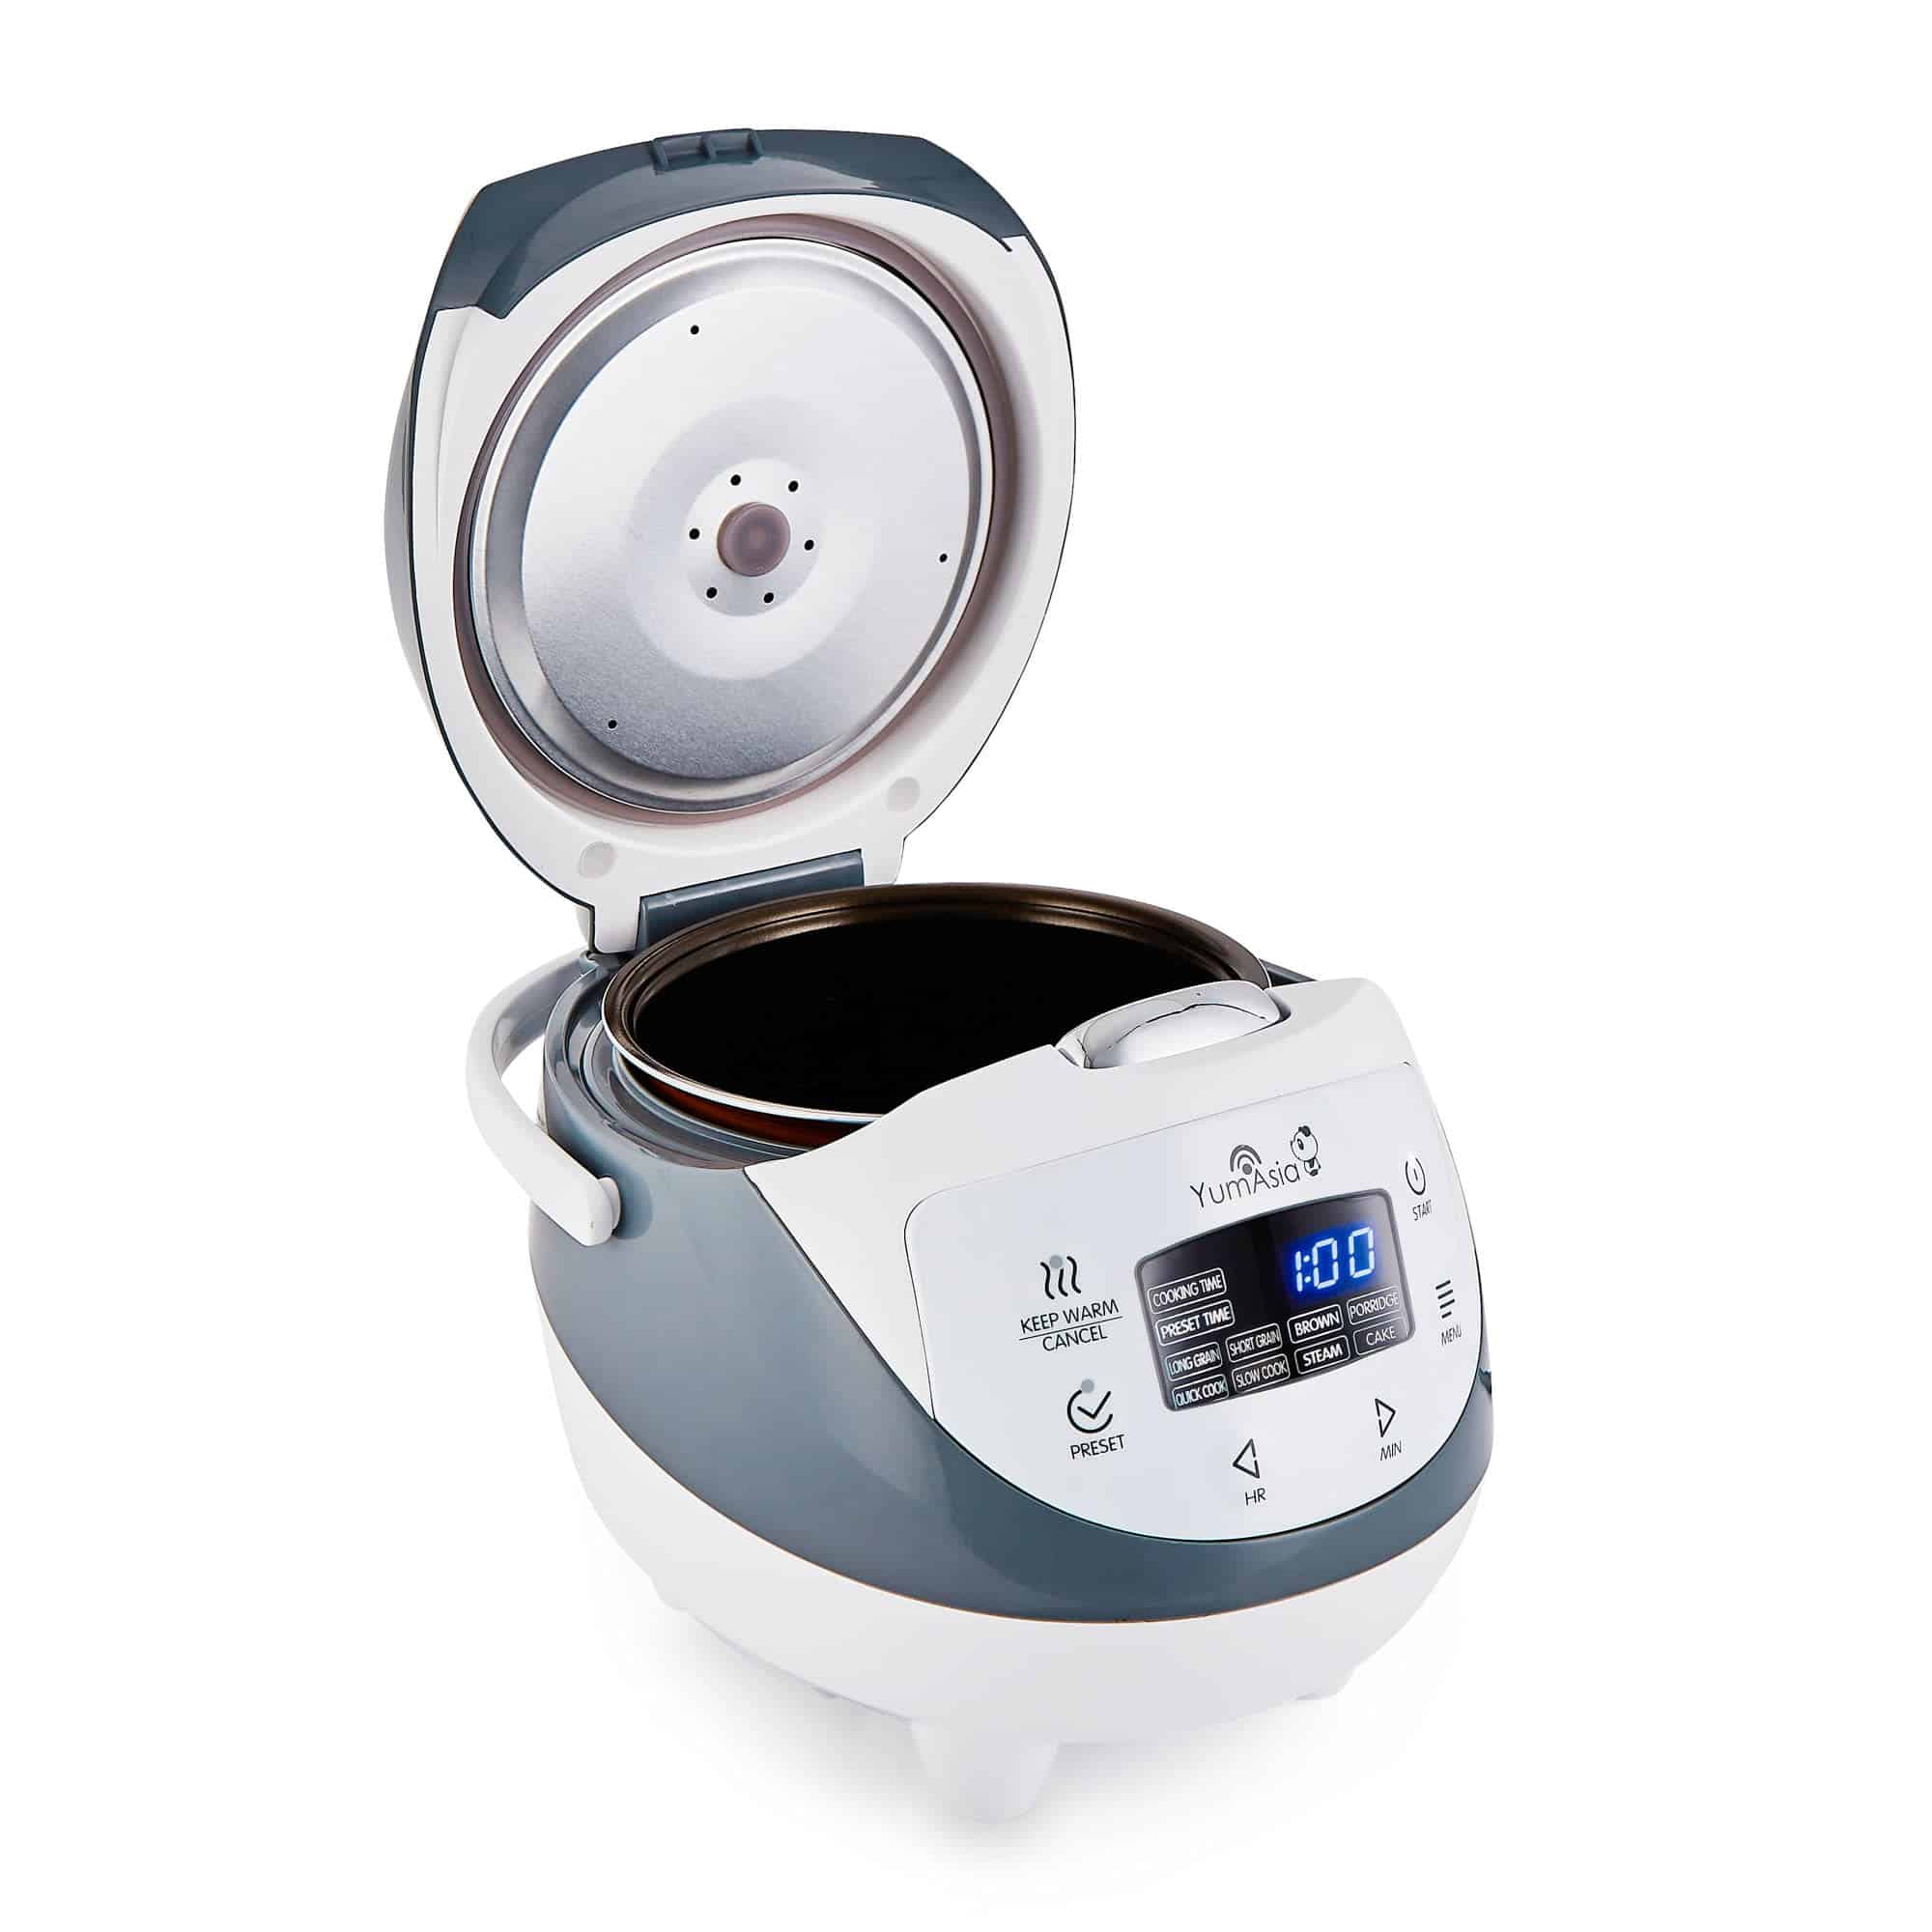 Yum Asia - The Panda mini rice cooker now has three looks. Classic white  and grey mixed colour, Arctic white or cobalt grey. Not only do they look  great but they make